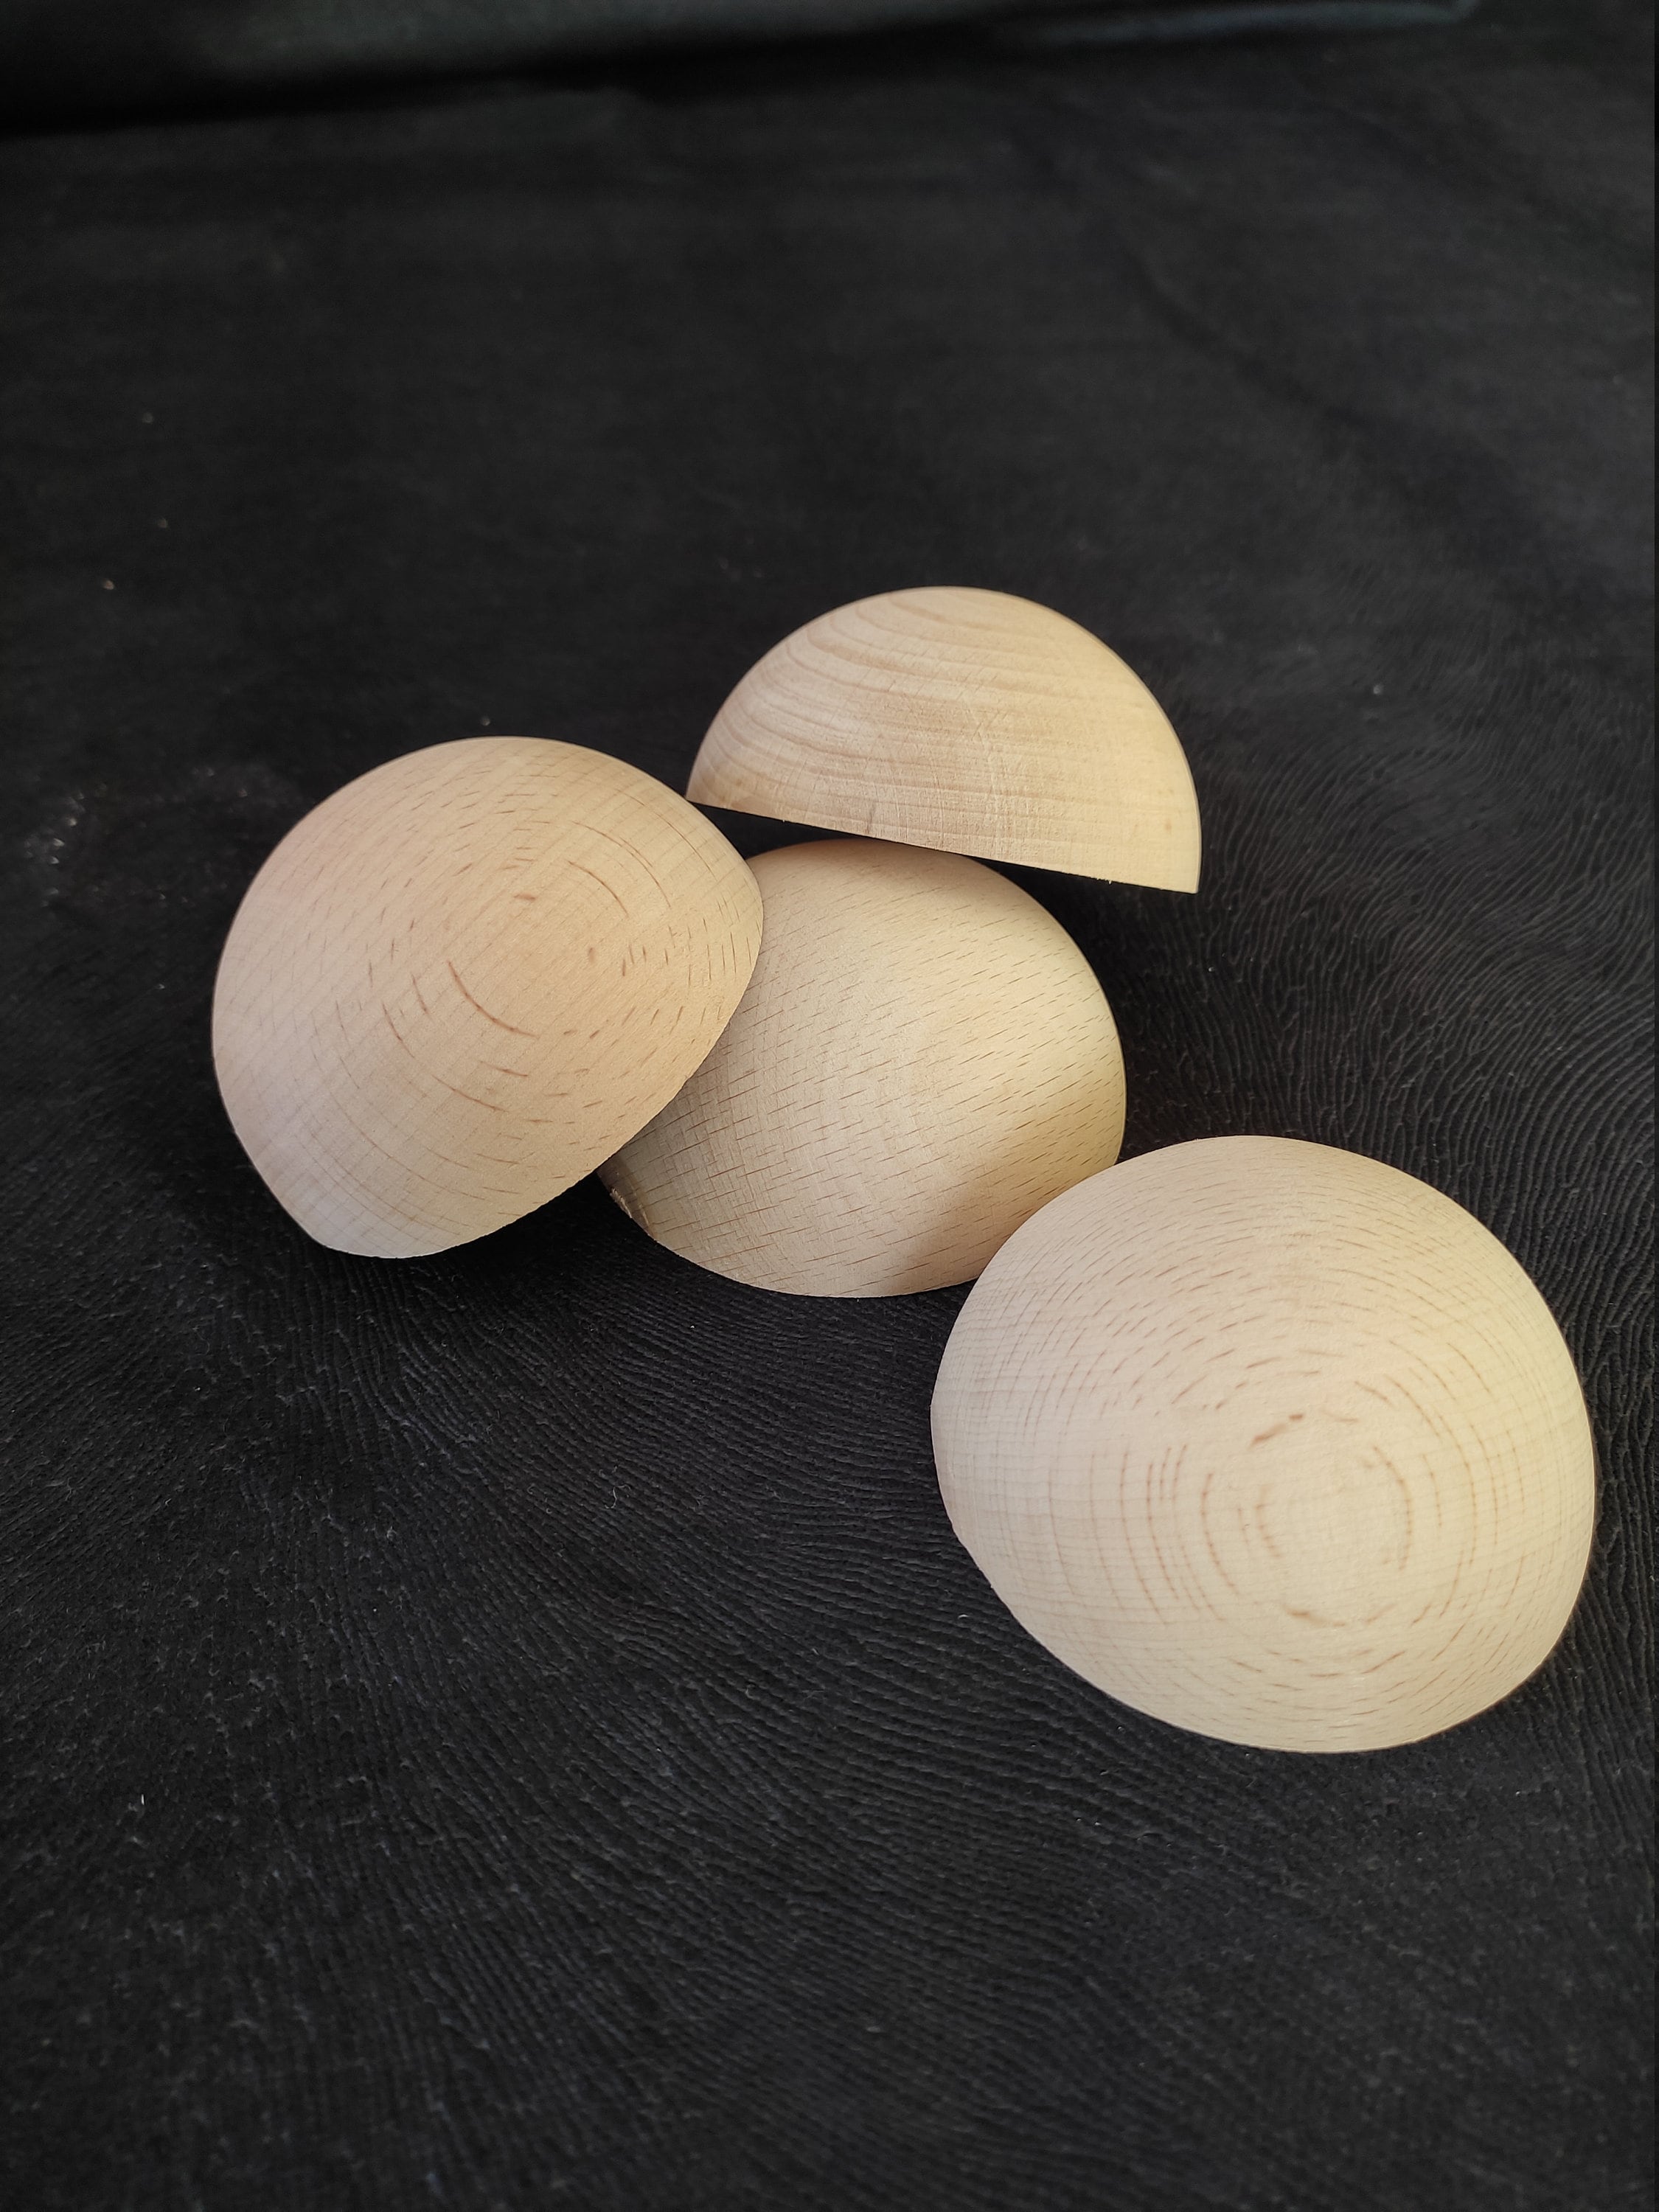 50mm Diameters Unfinished Round Split Wood Beads Bulk ANZKA 15pcs Large Half Balls for Crafts Wooden 2 inch Natural Half Sphere Ornaments 